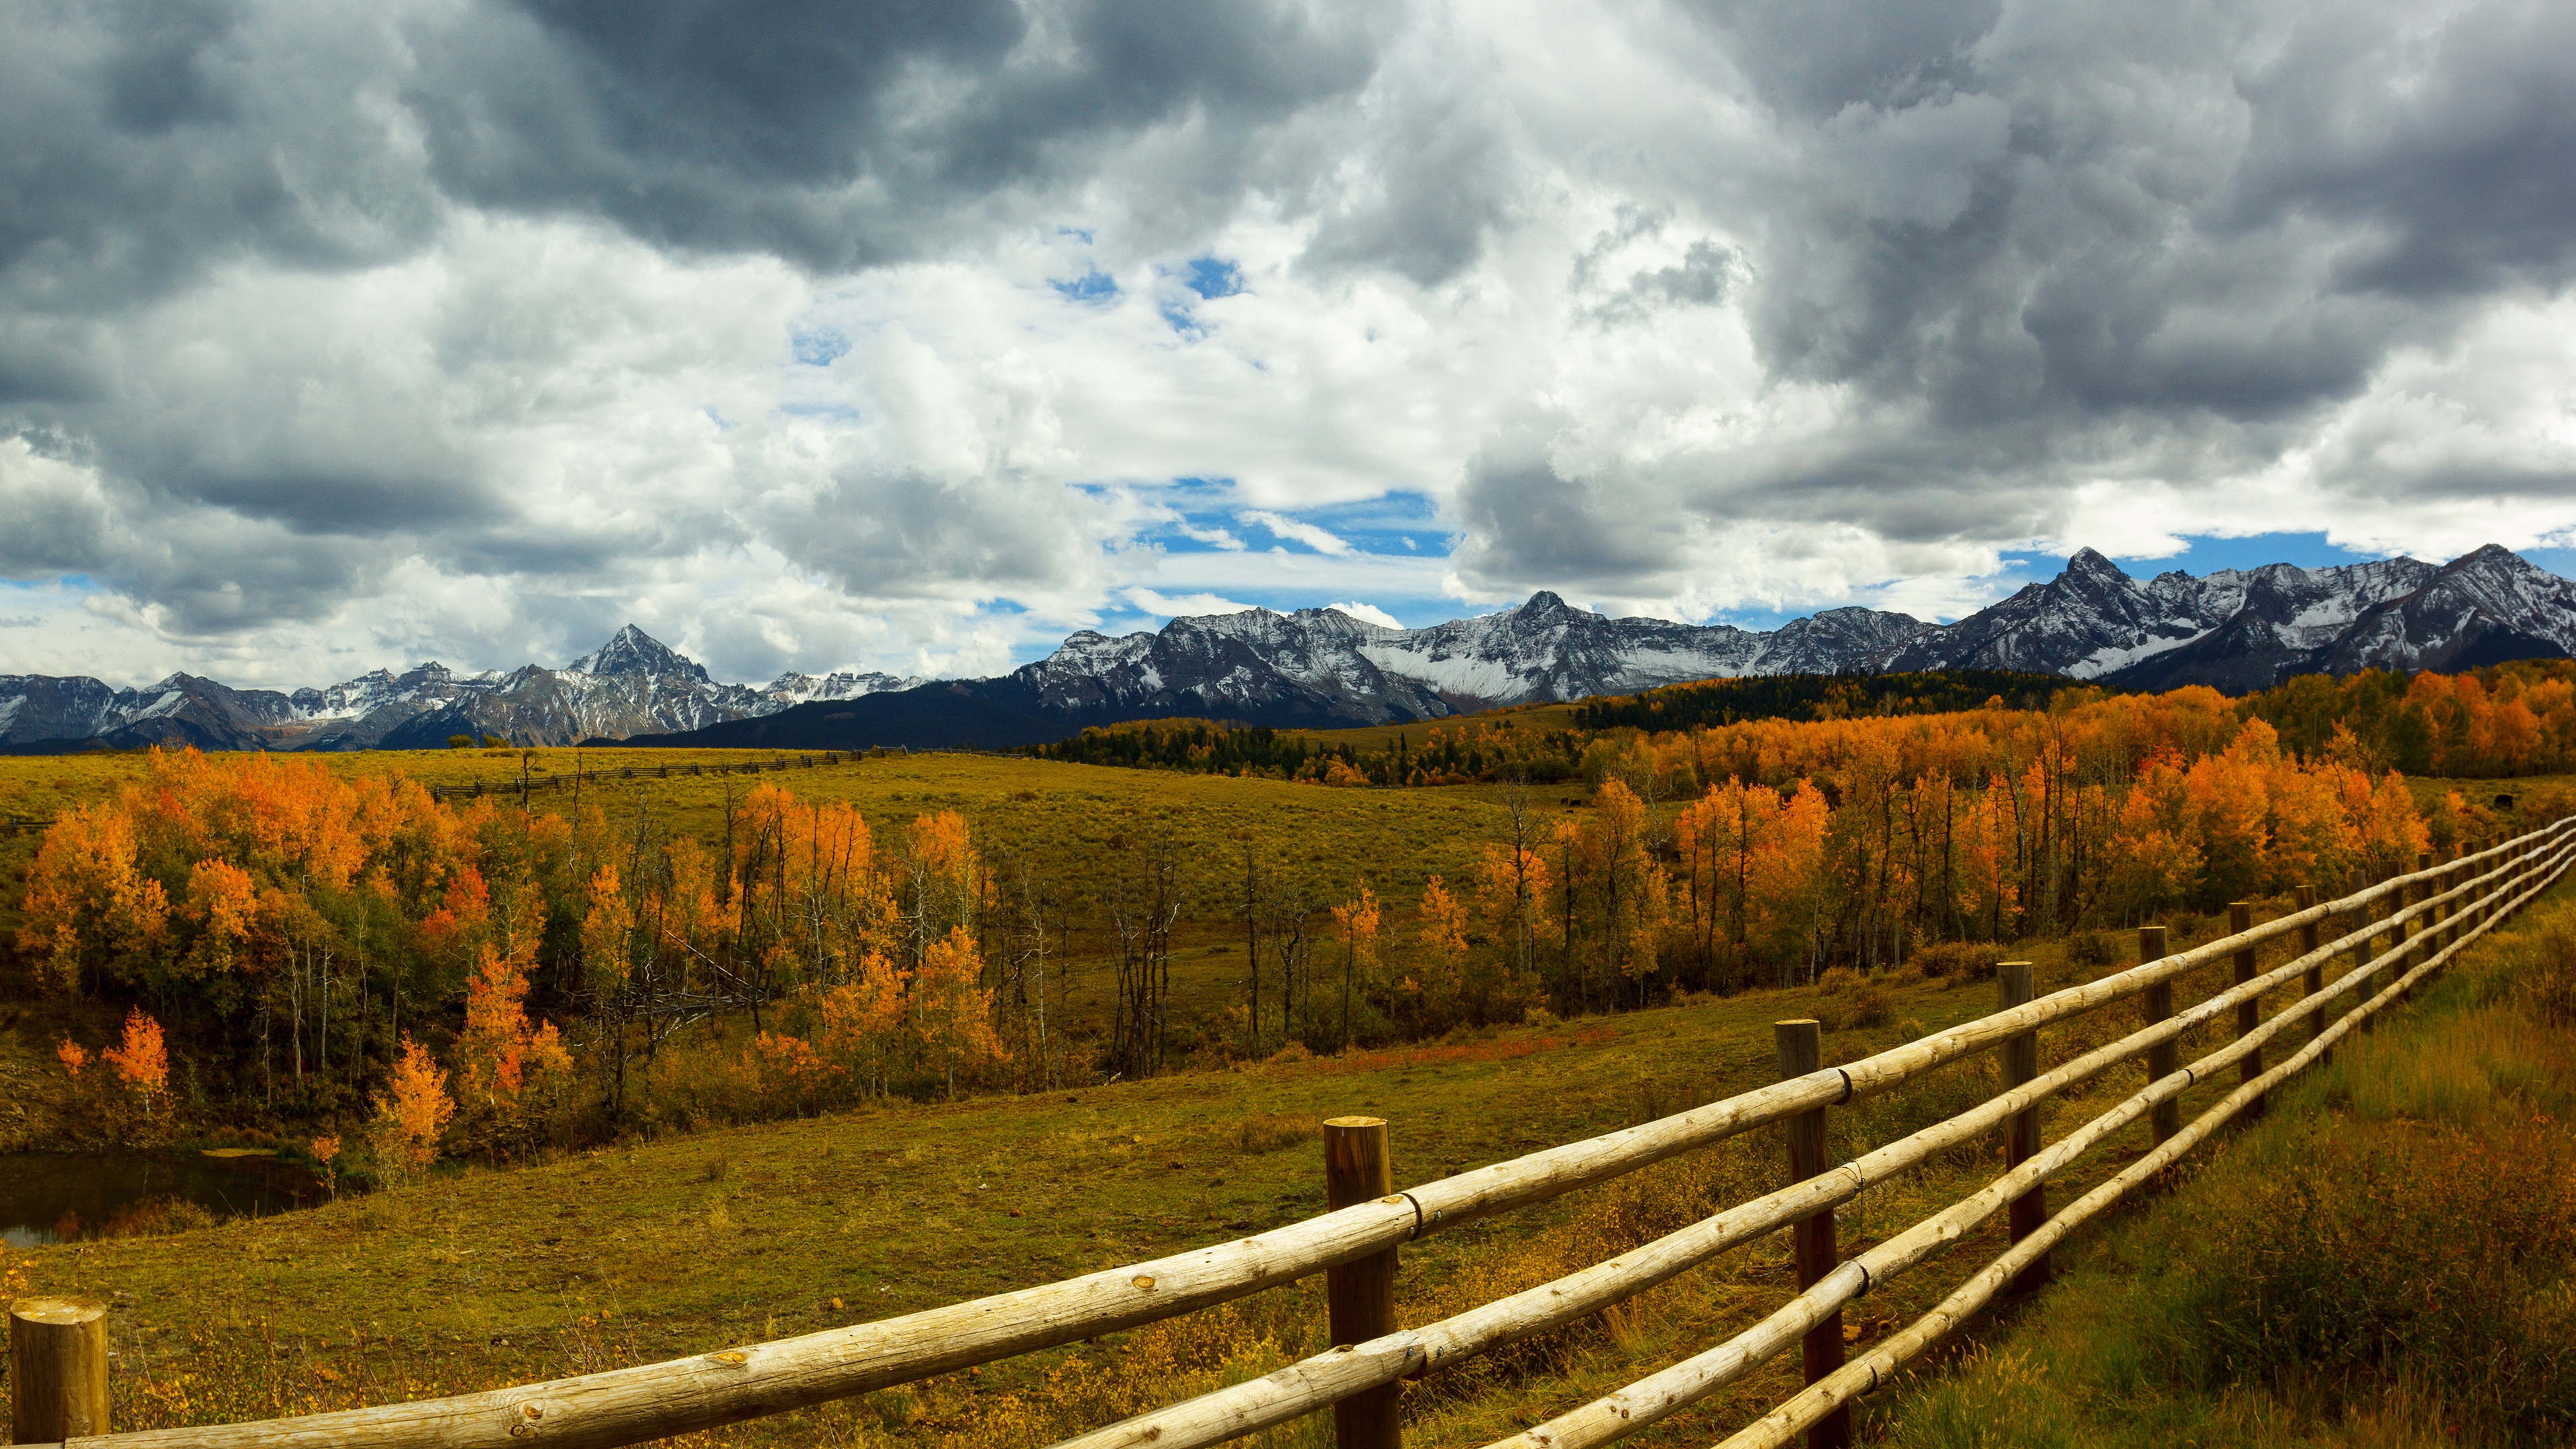 General 3840x2160 fence landscape sky clouds fall mountains nature